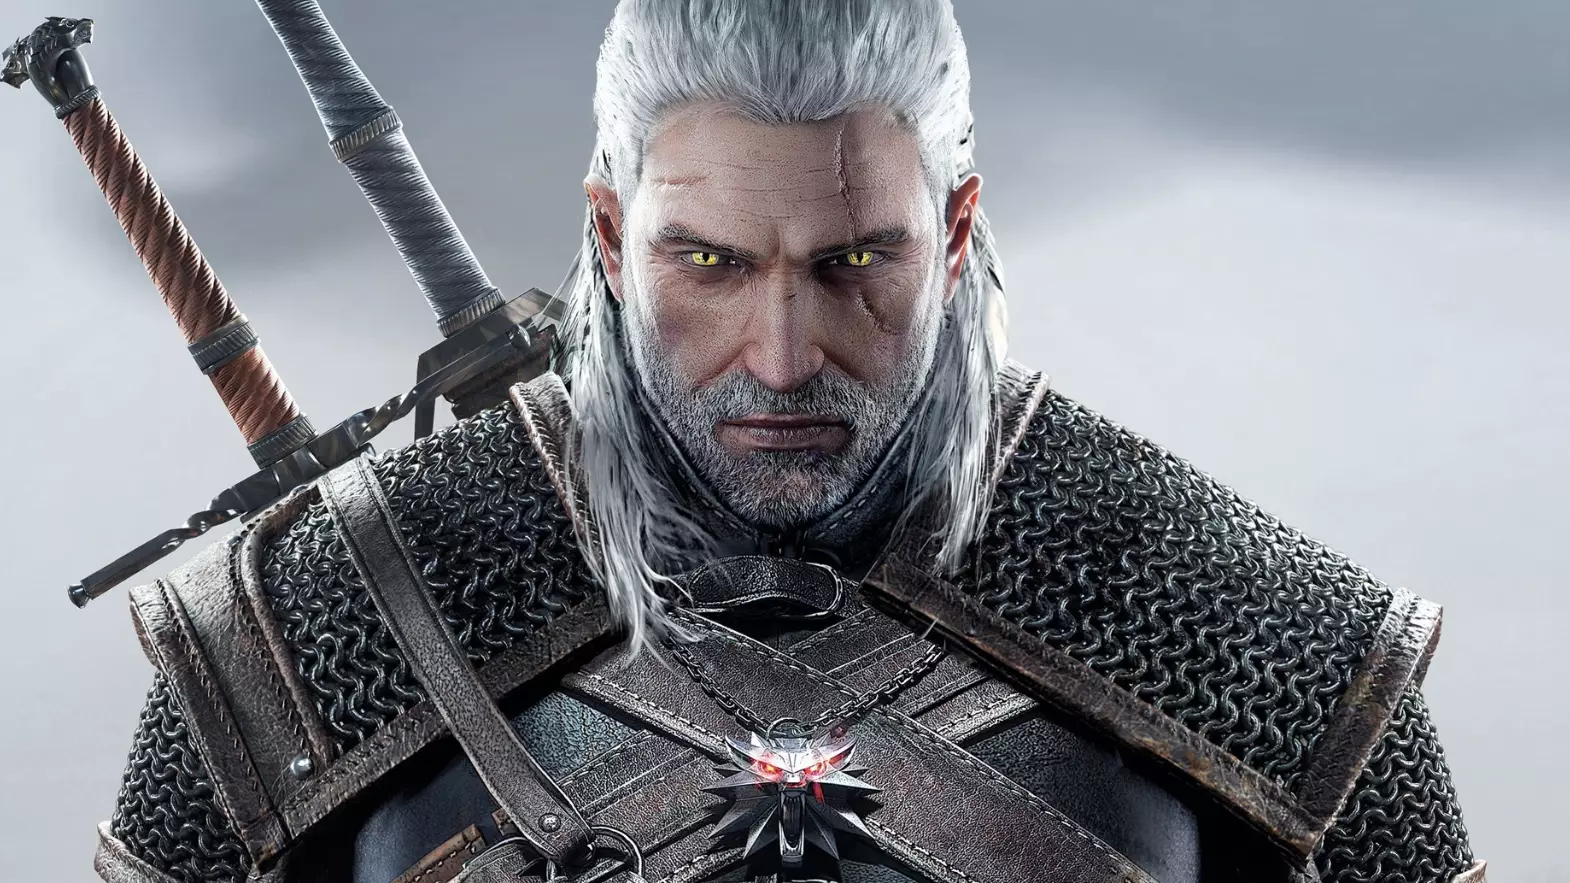 ​Henry Cavill, AKA Superman, Wants To Play Geralt In Netflix's The Witcher Series